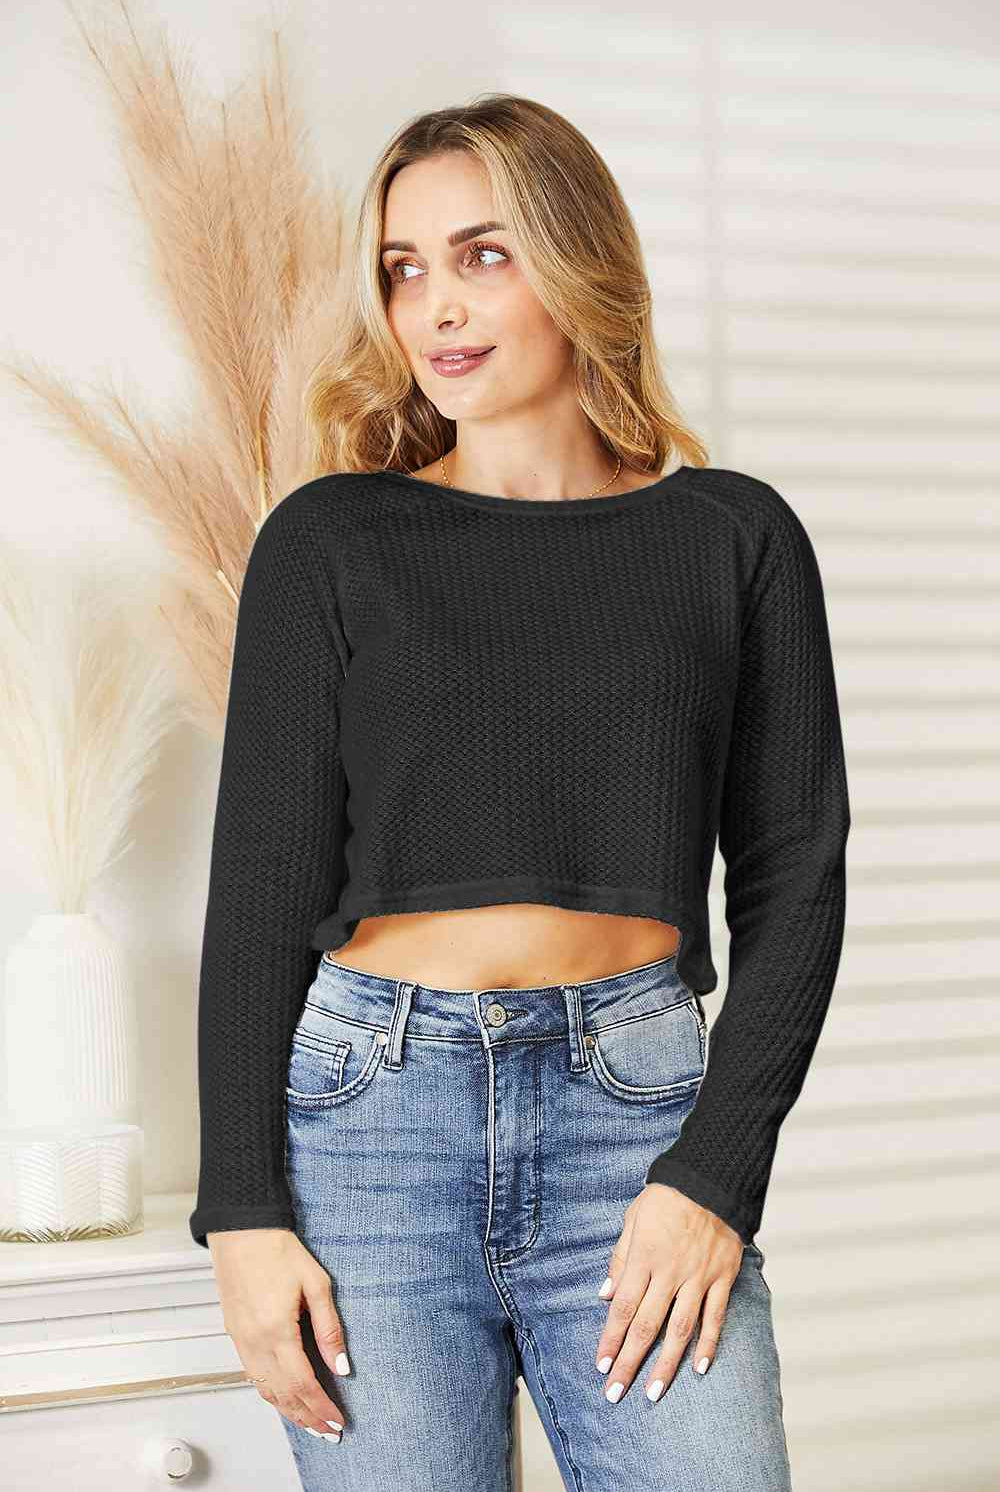 Dark Slate Gray Full Size Long Sleeve Cropped Top Plus Size Clothes